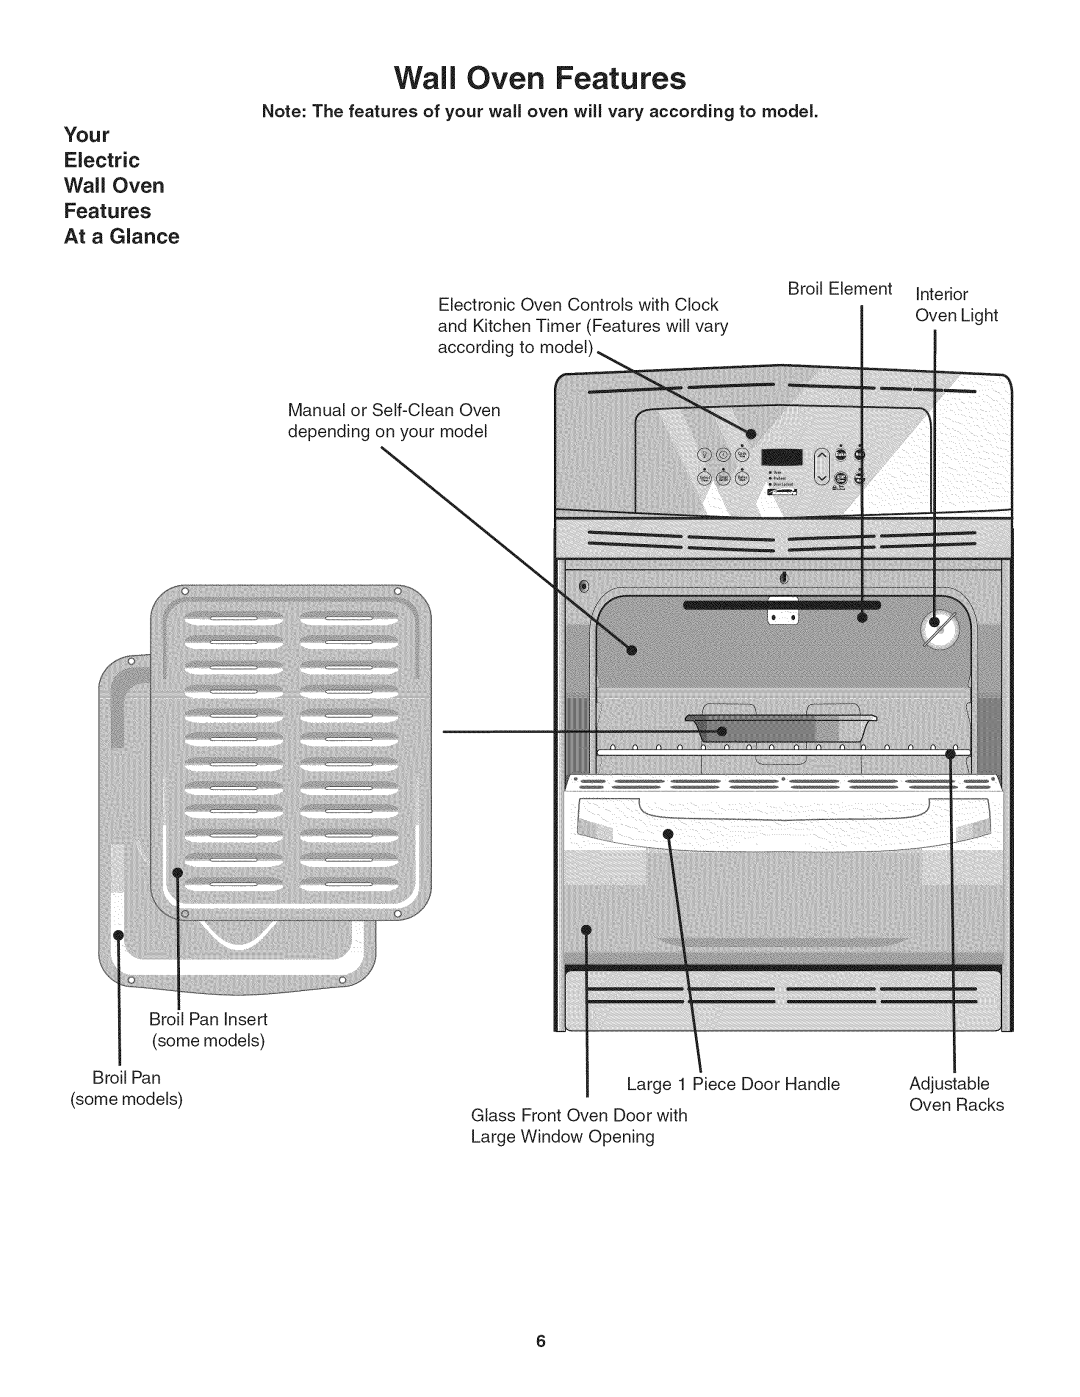 Kenmore 790.4019 manual Your, Electric Wall Oven Features At a Glance 